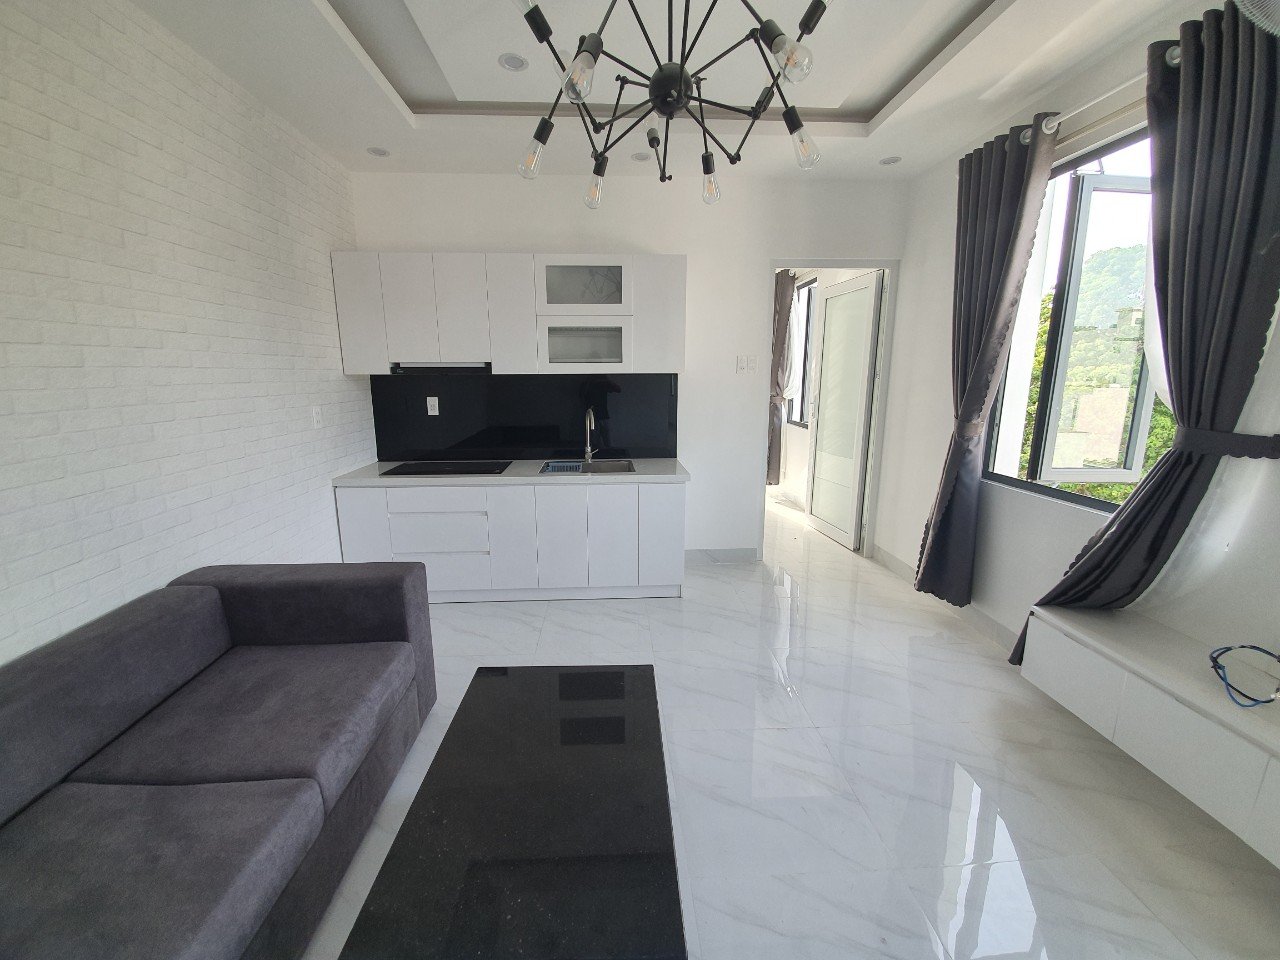 Luxury 2 bedroom Apartment For Rent with 2 bathrooms in Son Tra Da Nang